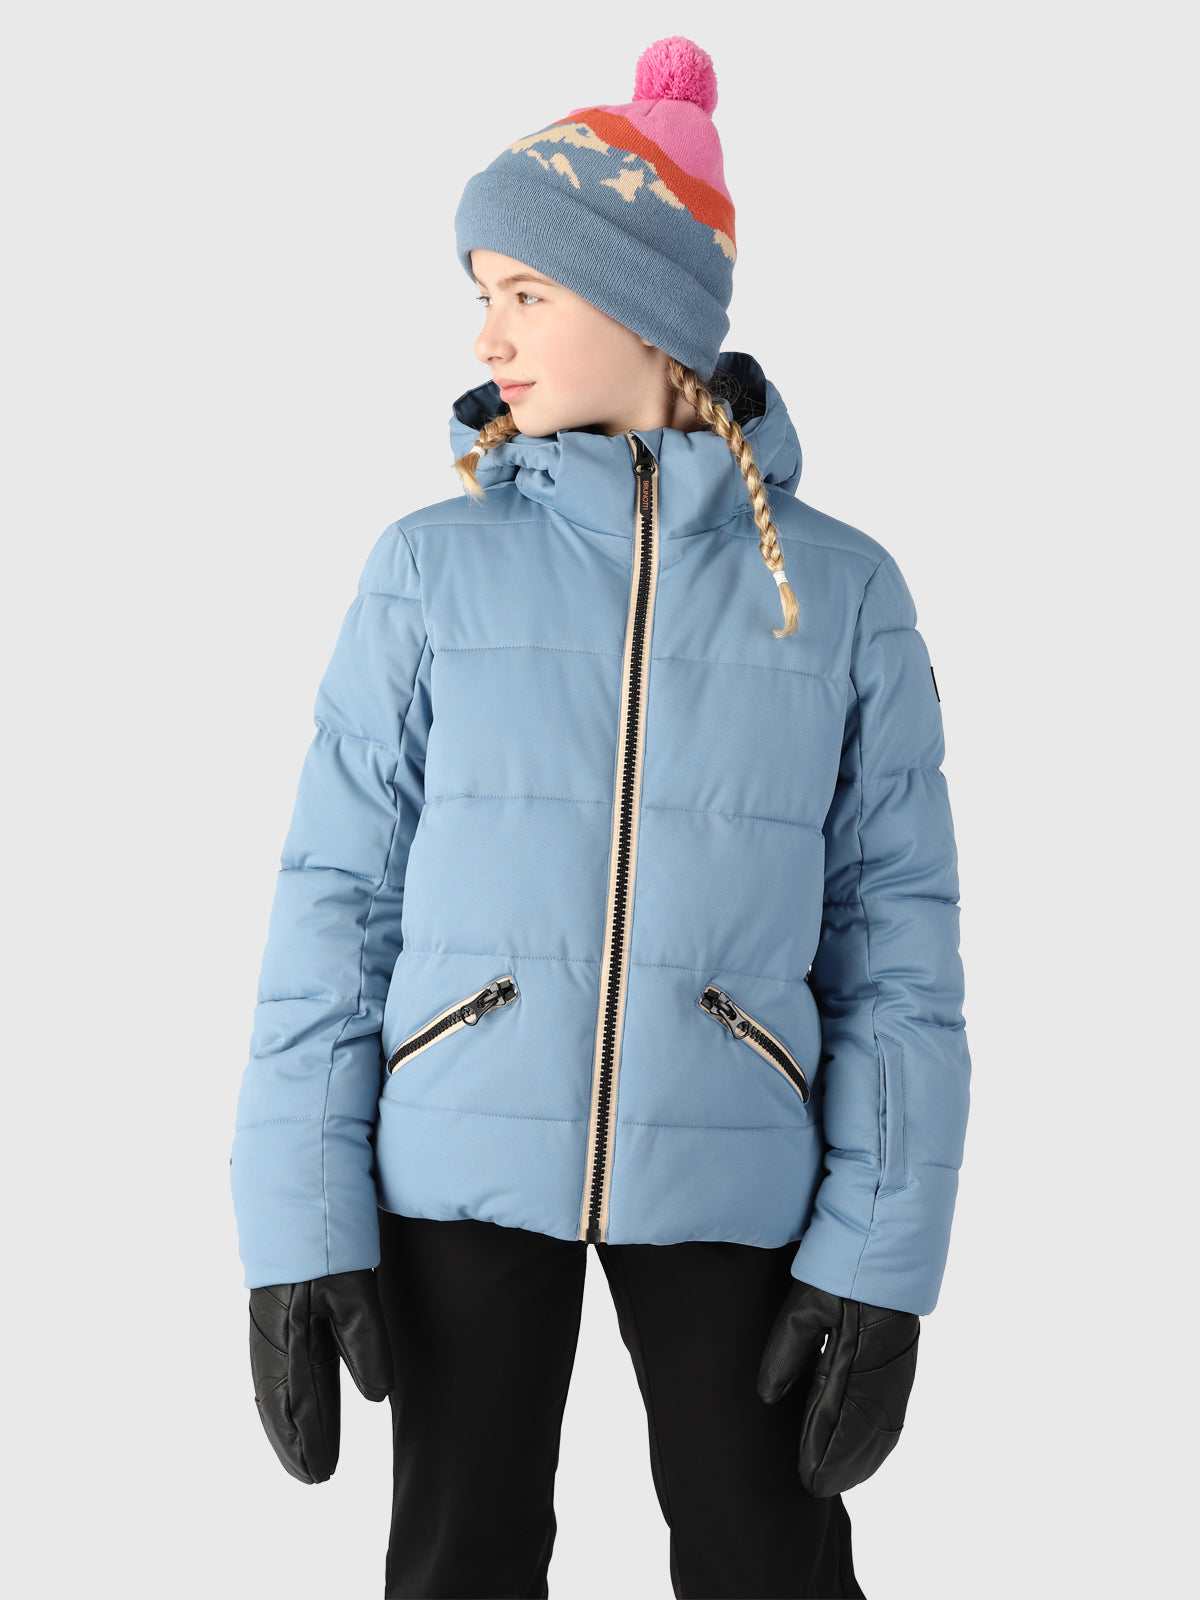 performance and Brunotti for Snow Jackets Jackets: Ski Snowboard Men, High Women, and Kids